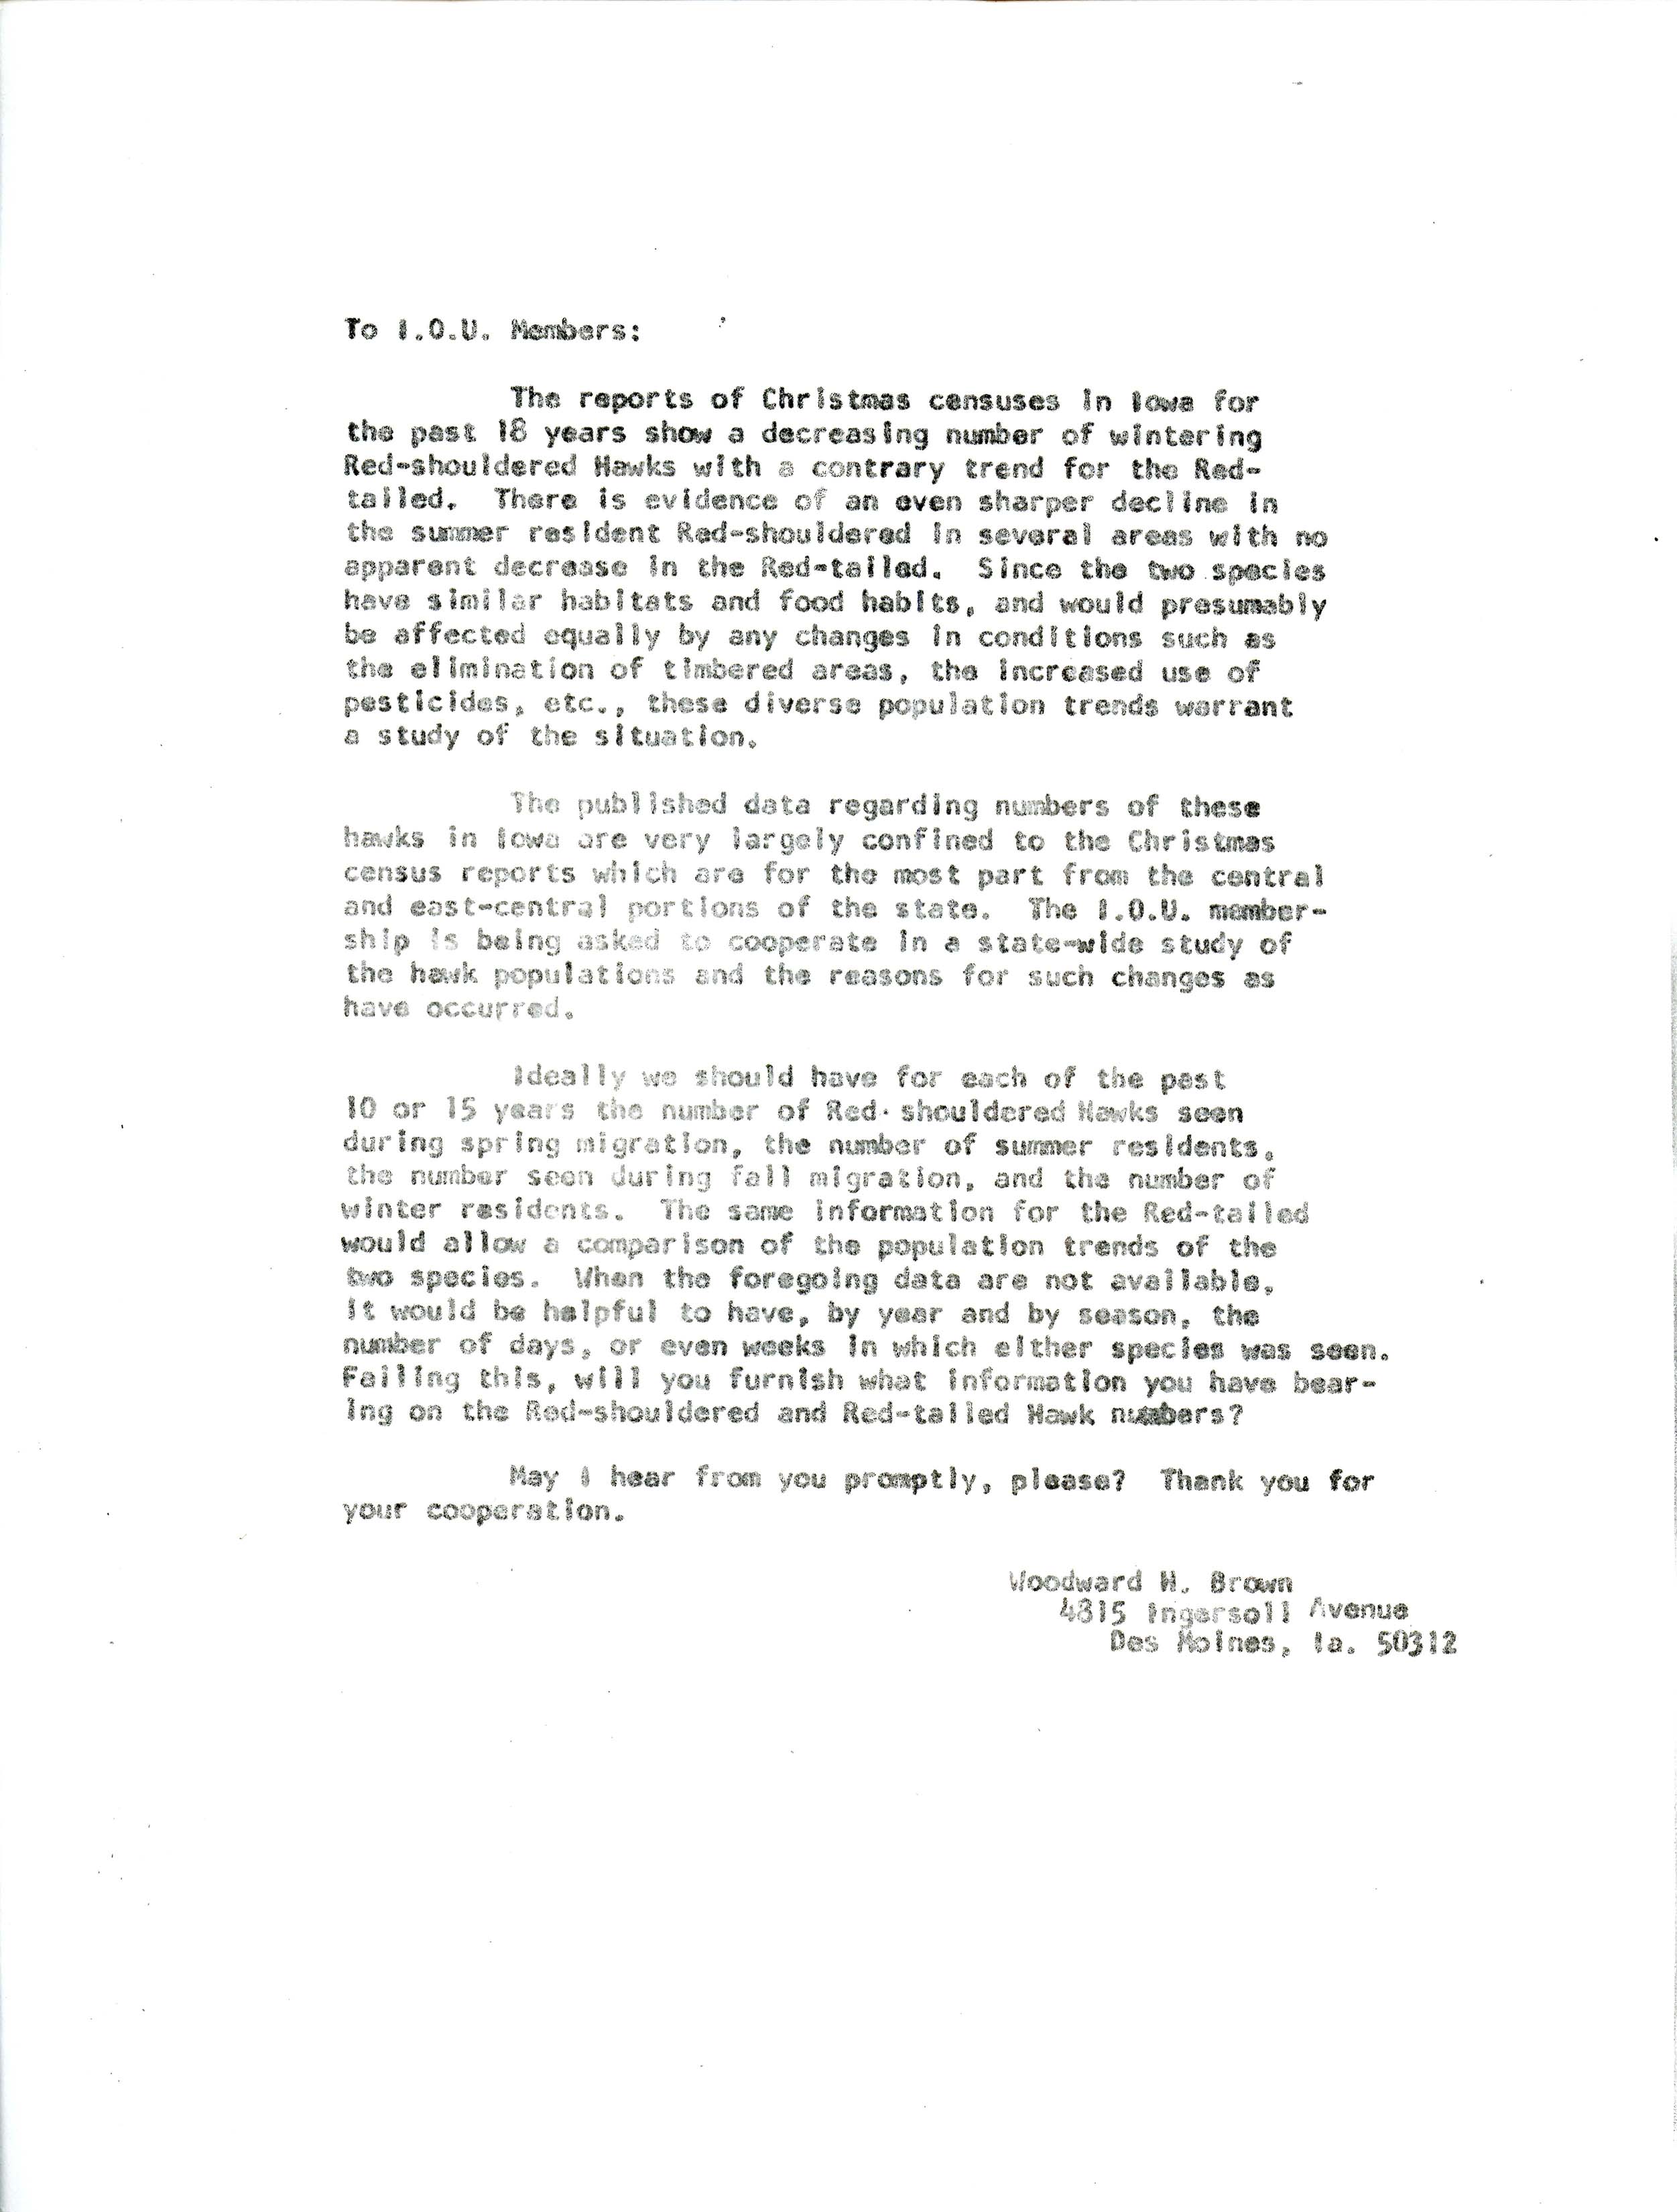 Woodward H. Brown letter to Iowa Ornithologists Union members regarding Red-shouldered Hawk and Red-tailed Hawk populations